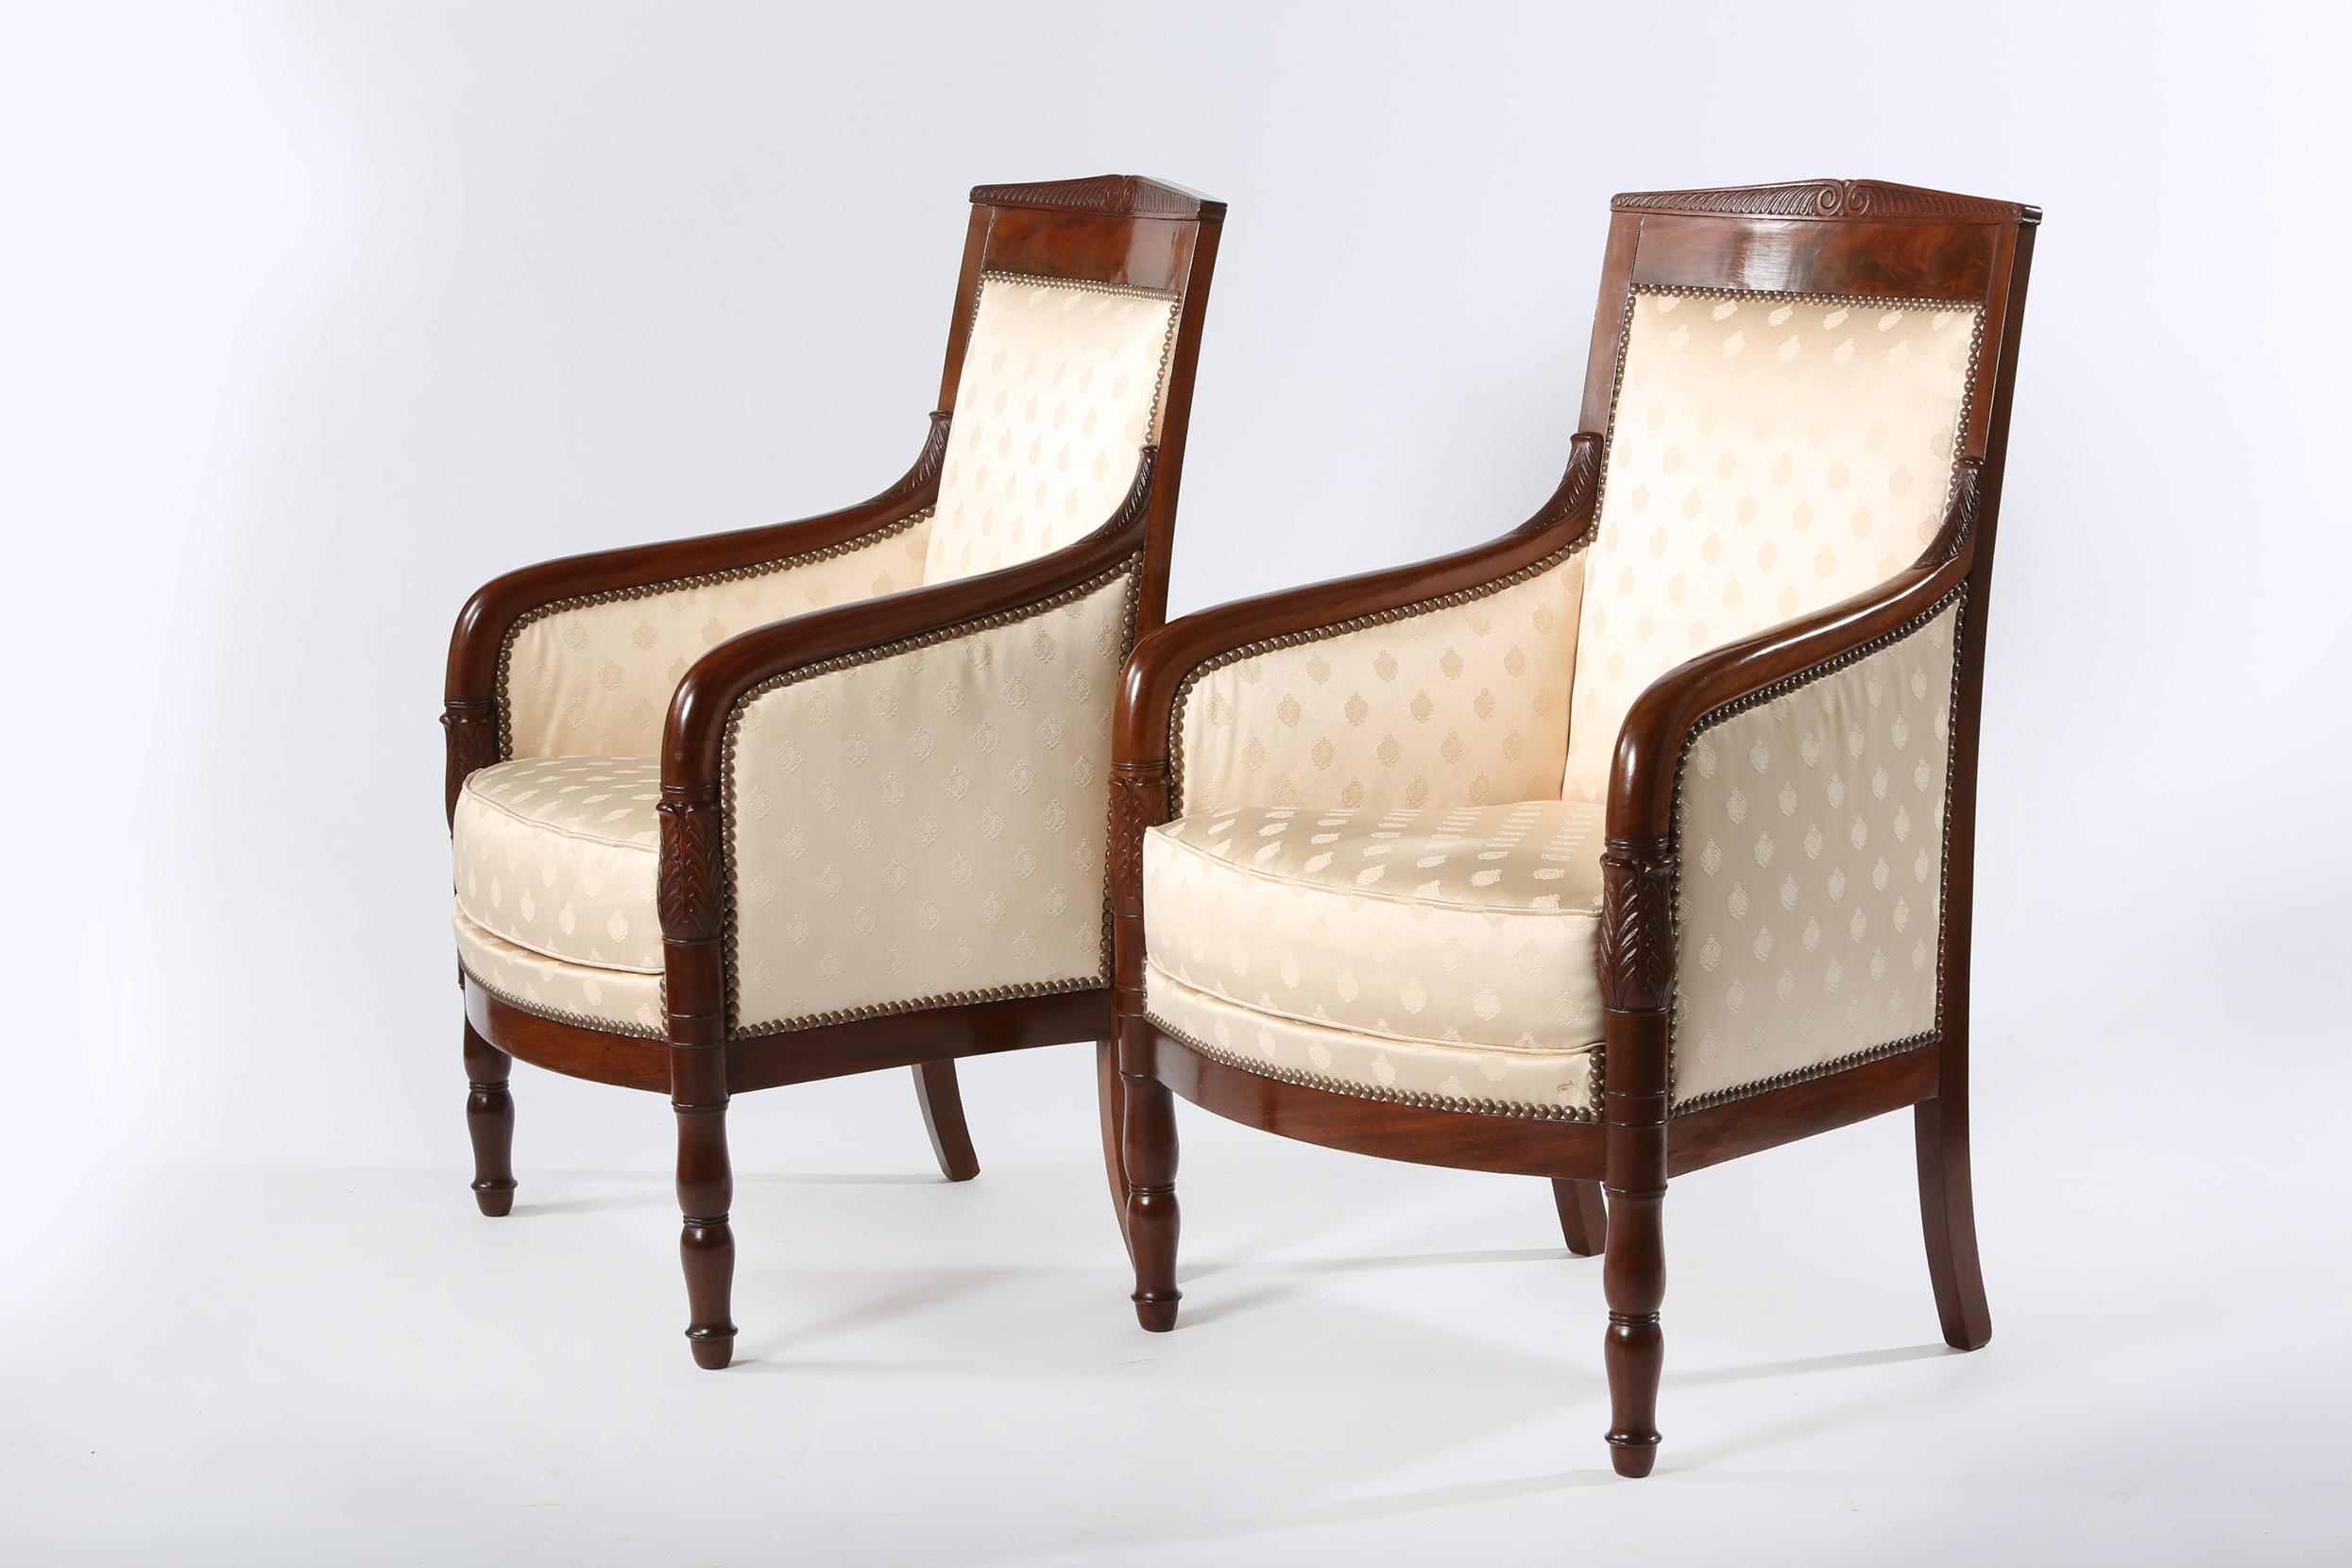 Early 20th century Edwardian mahogany wood framed upholstery set of two armchairs. Signed and dated underneath by the maker. Great vintage condition. Clean upholstery, minor wear consistent with age / use. Each armchair measure about 38 inches high